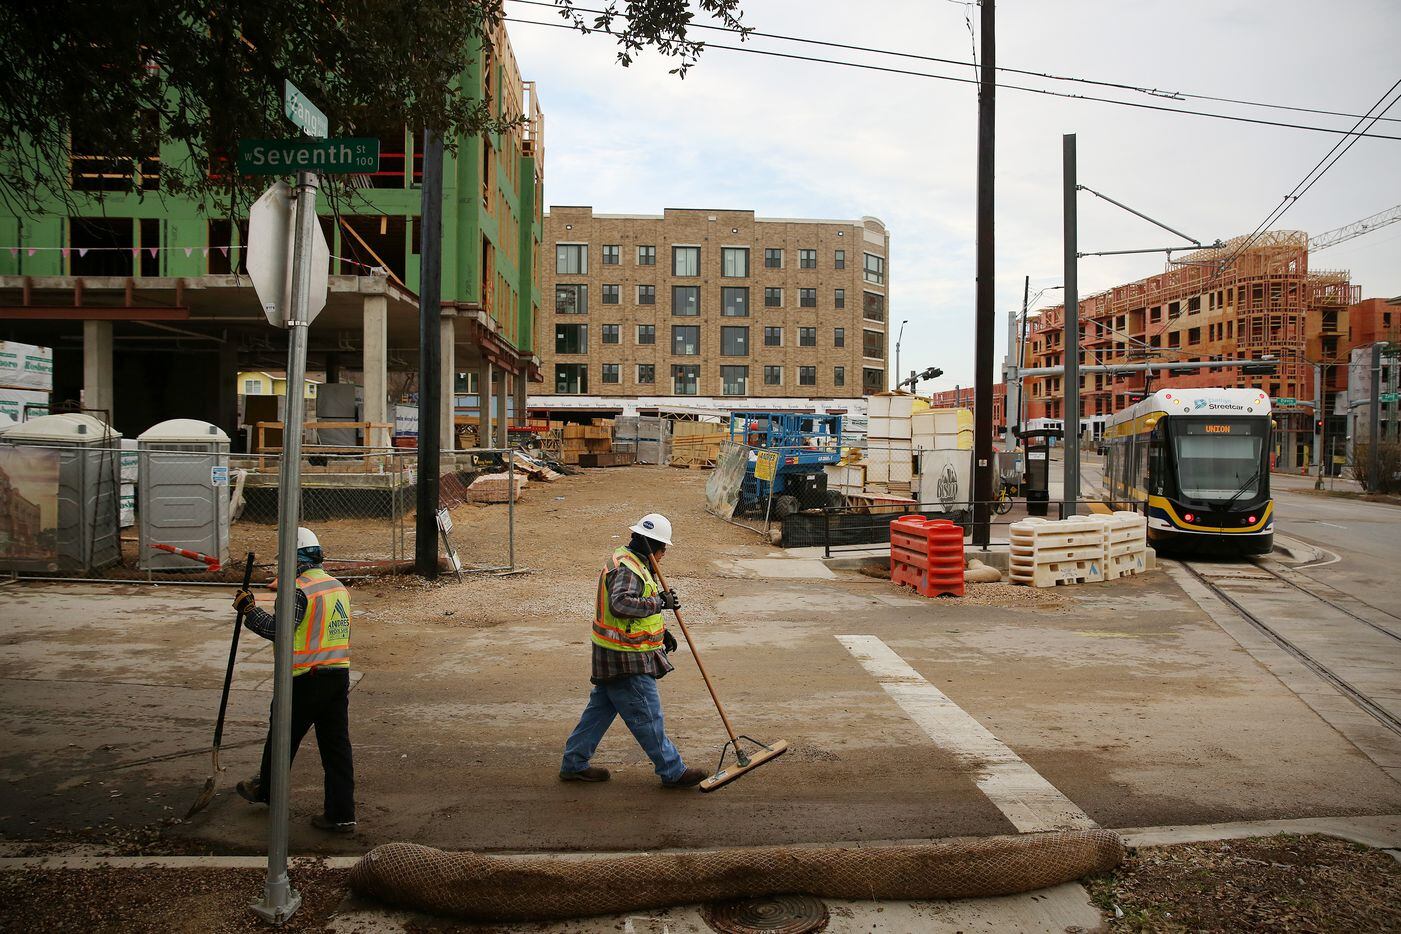 Ray Ramos (center), who grew up nearby close to Sunset High School, and a fellow laborer sweep near the corner of Seventh Street and Zang Boulevard across from the future property of Alamo Manhattan apartments. The Novel Bishop Arts apartments and the Alamo Manhattan apartments are being built across the street from each other at the corner of Zang Boulevard and Davis Street in the Oak Cliff neighborhood.